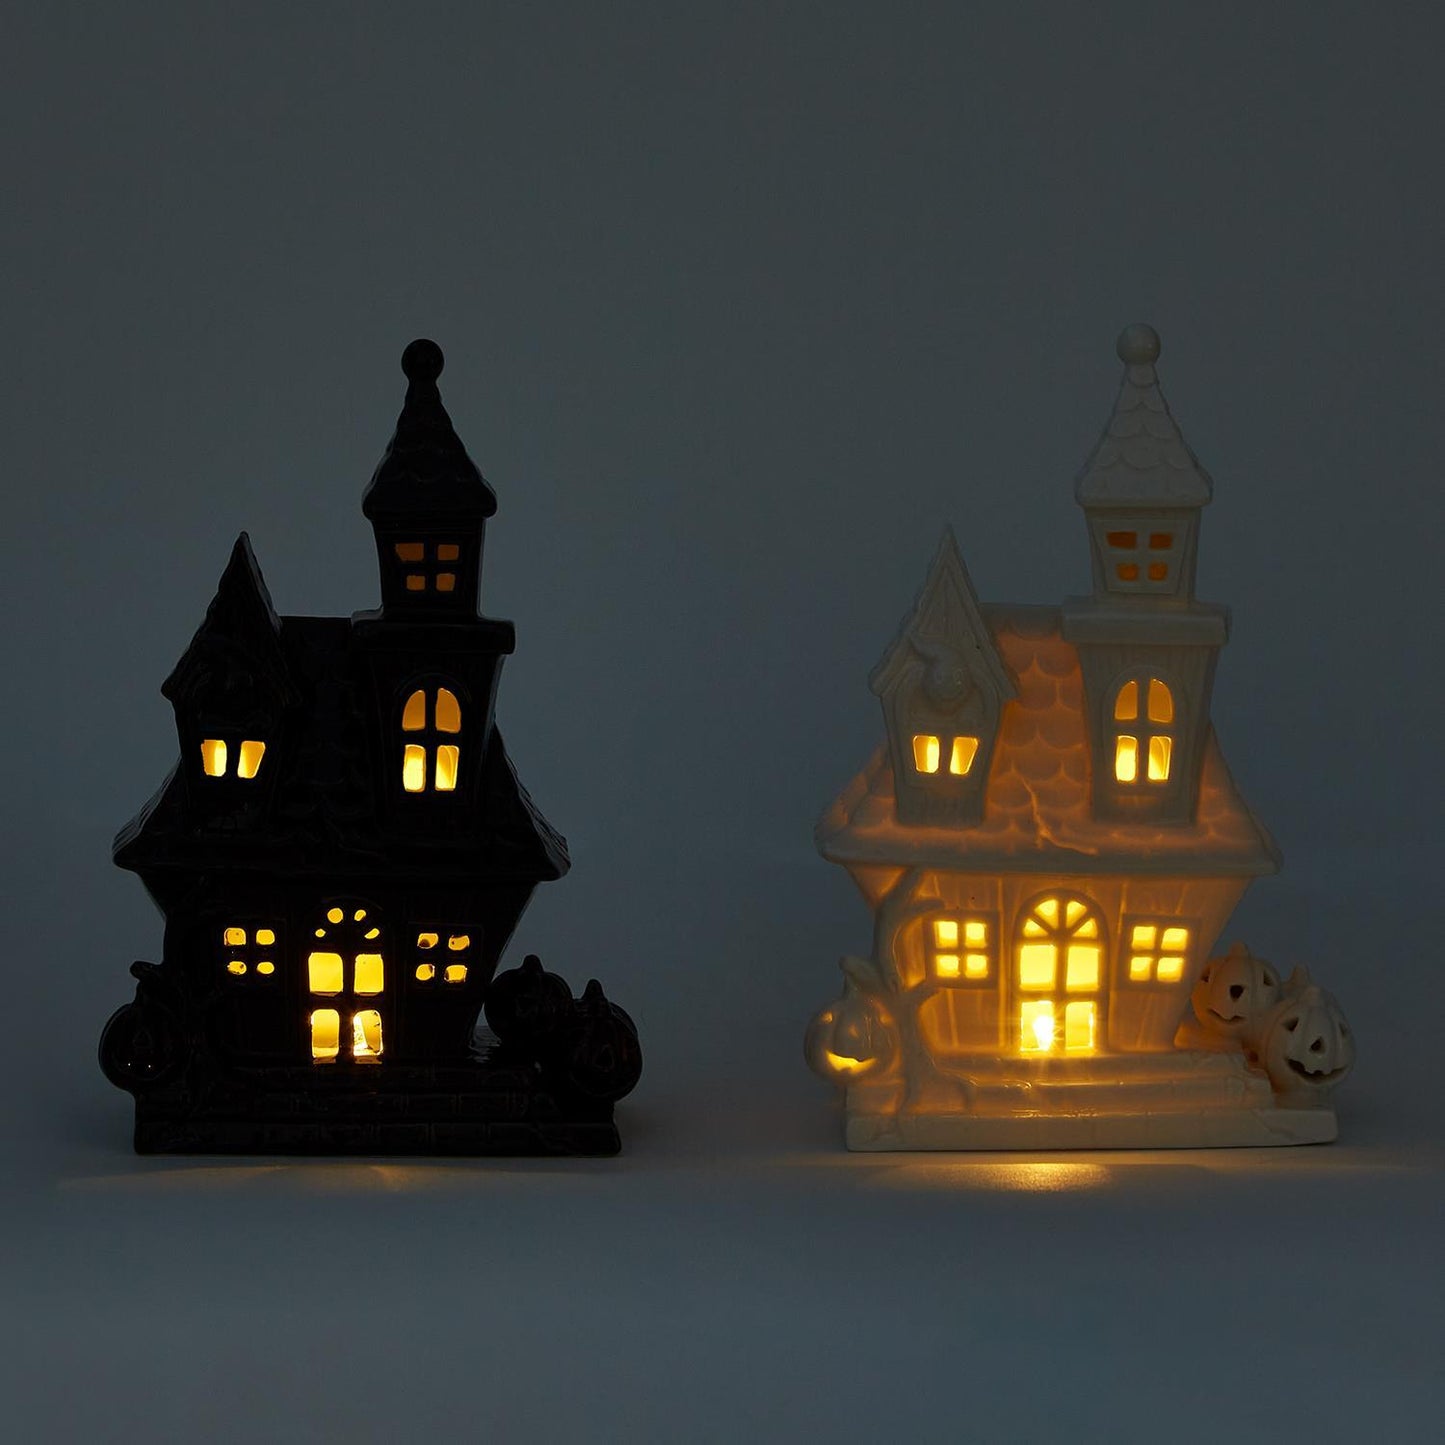 Light Up Haunted House In Assorted 2 Colors